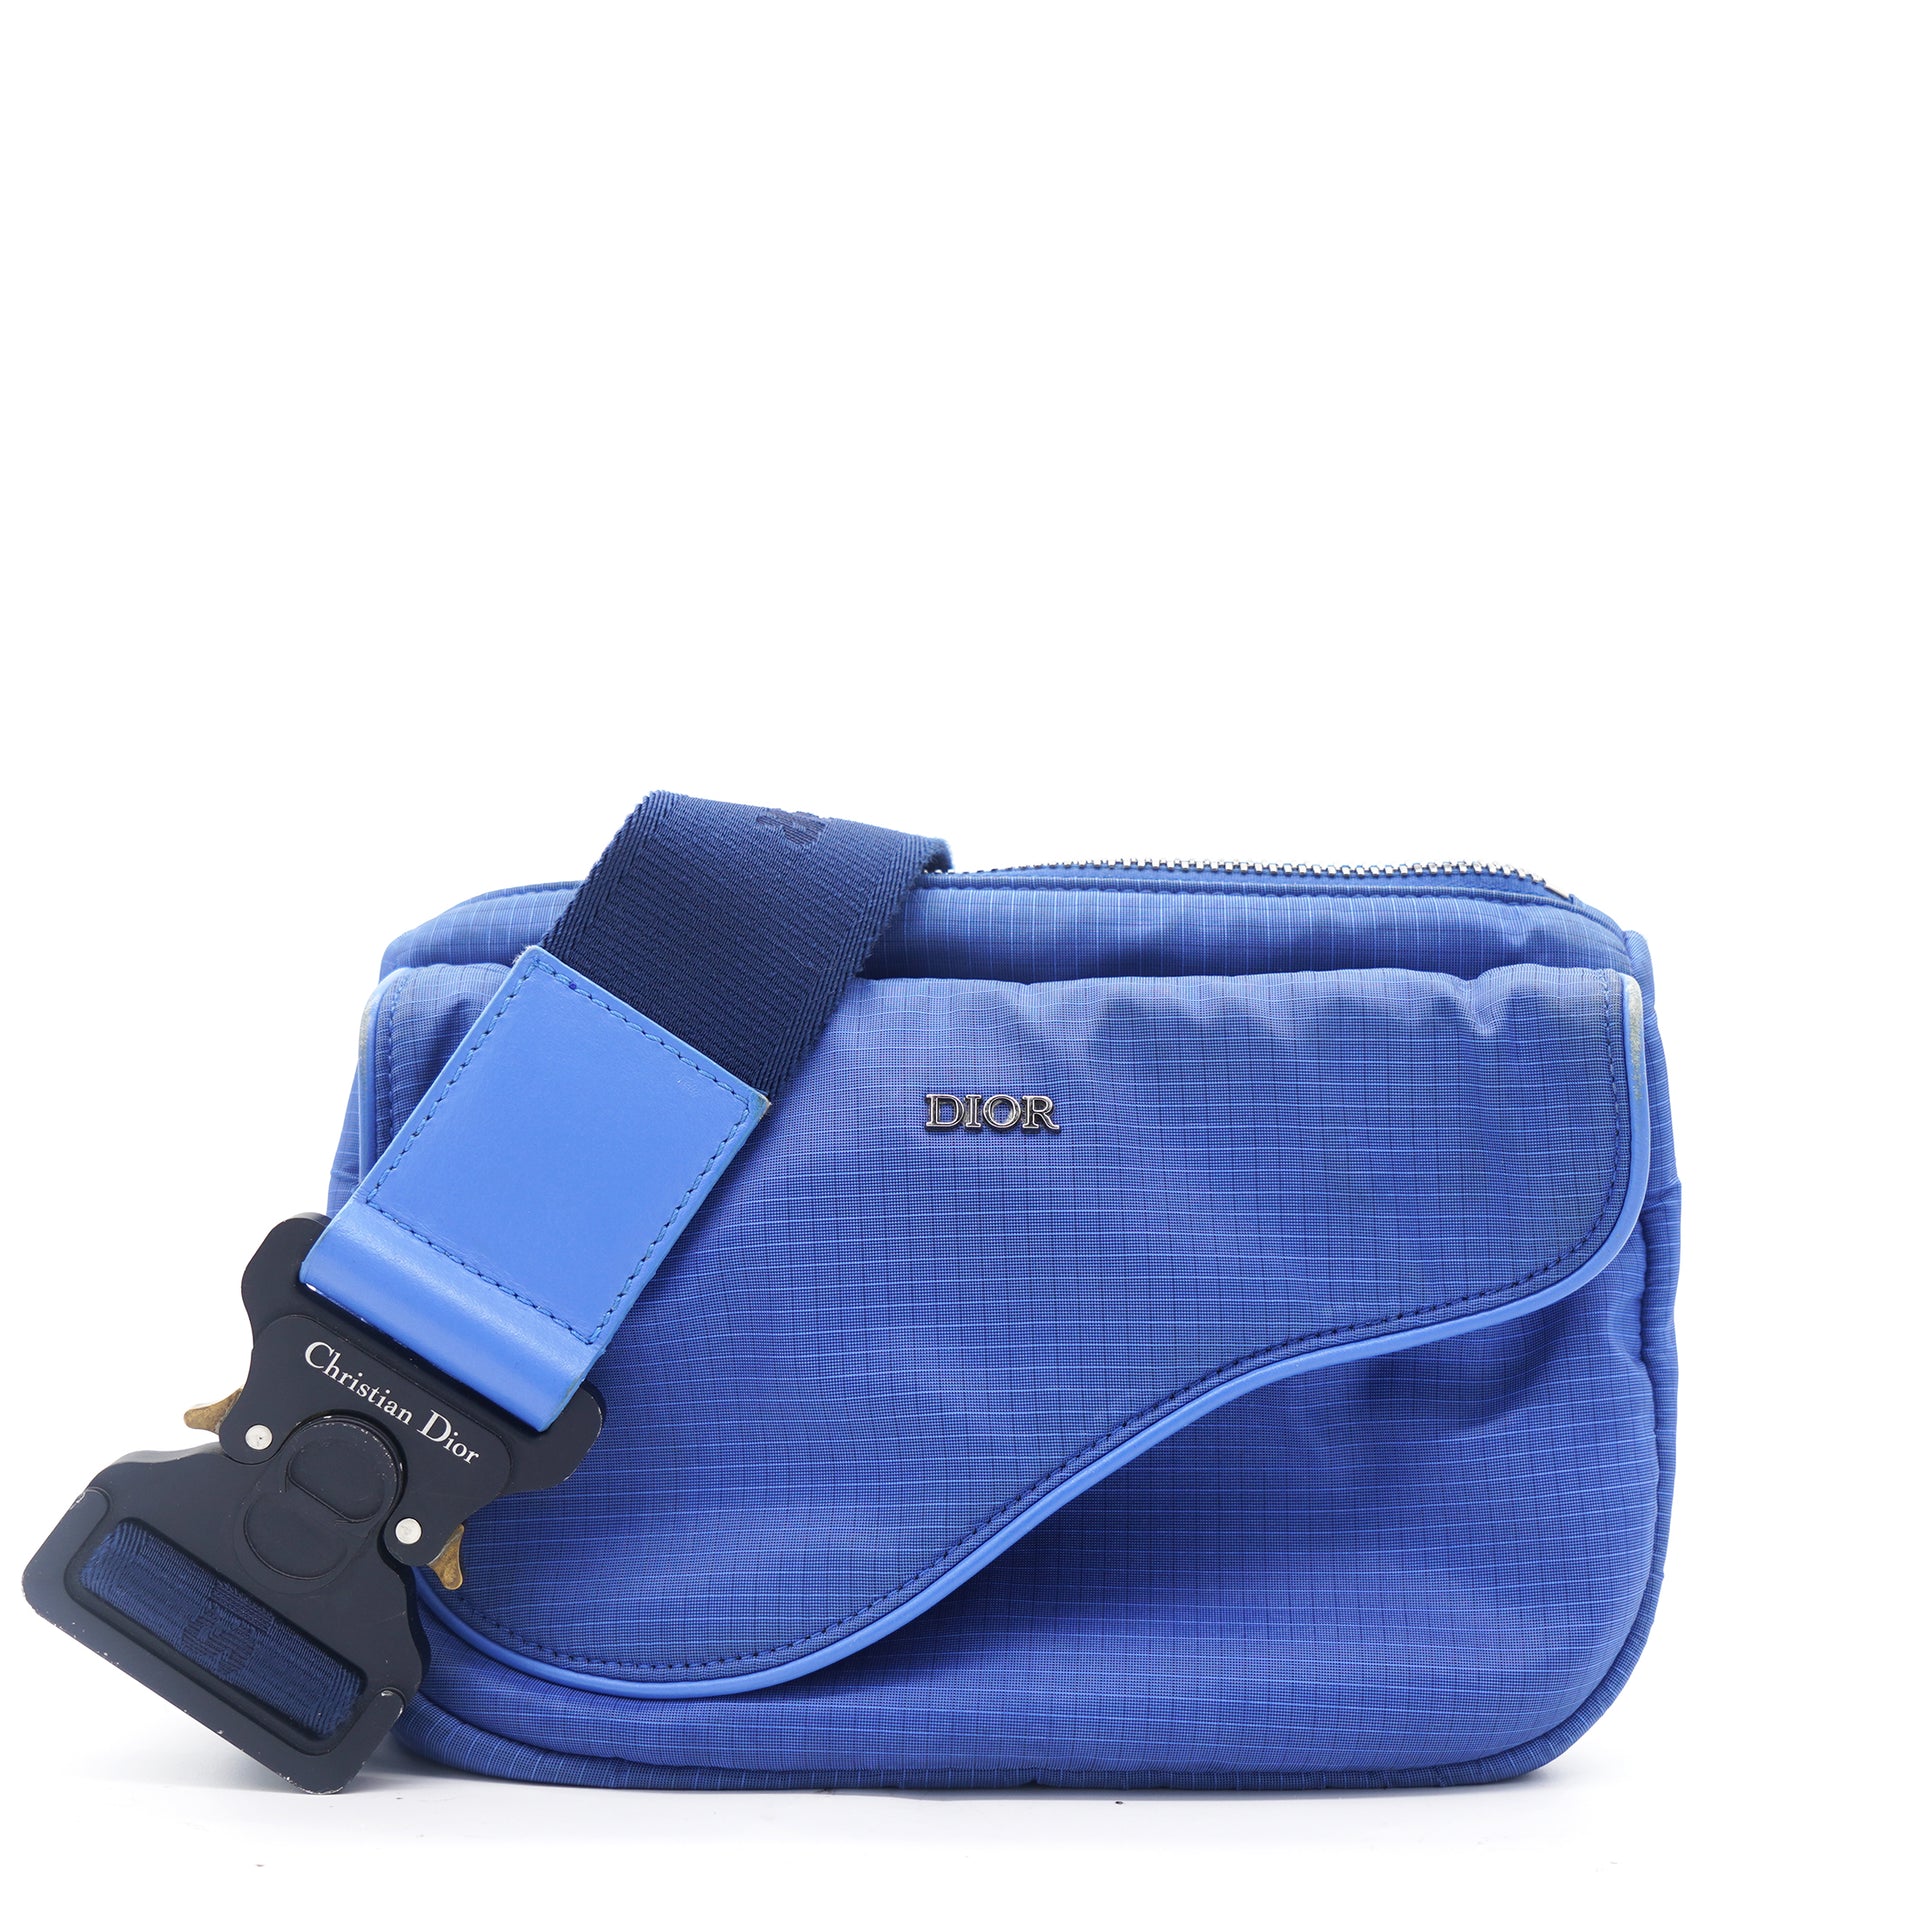 Dior Saddle Pouch for Men